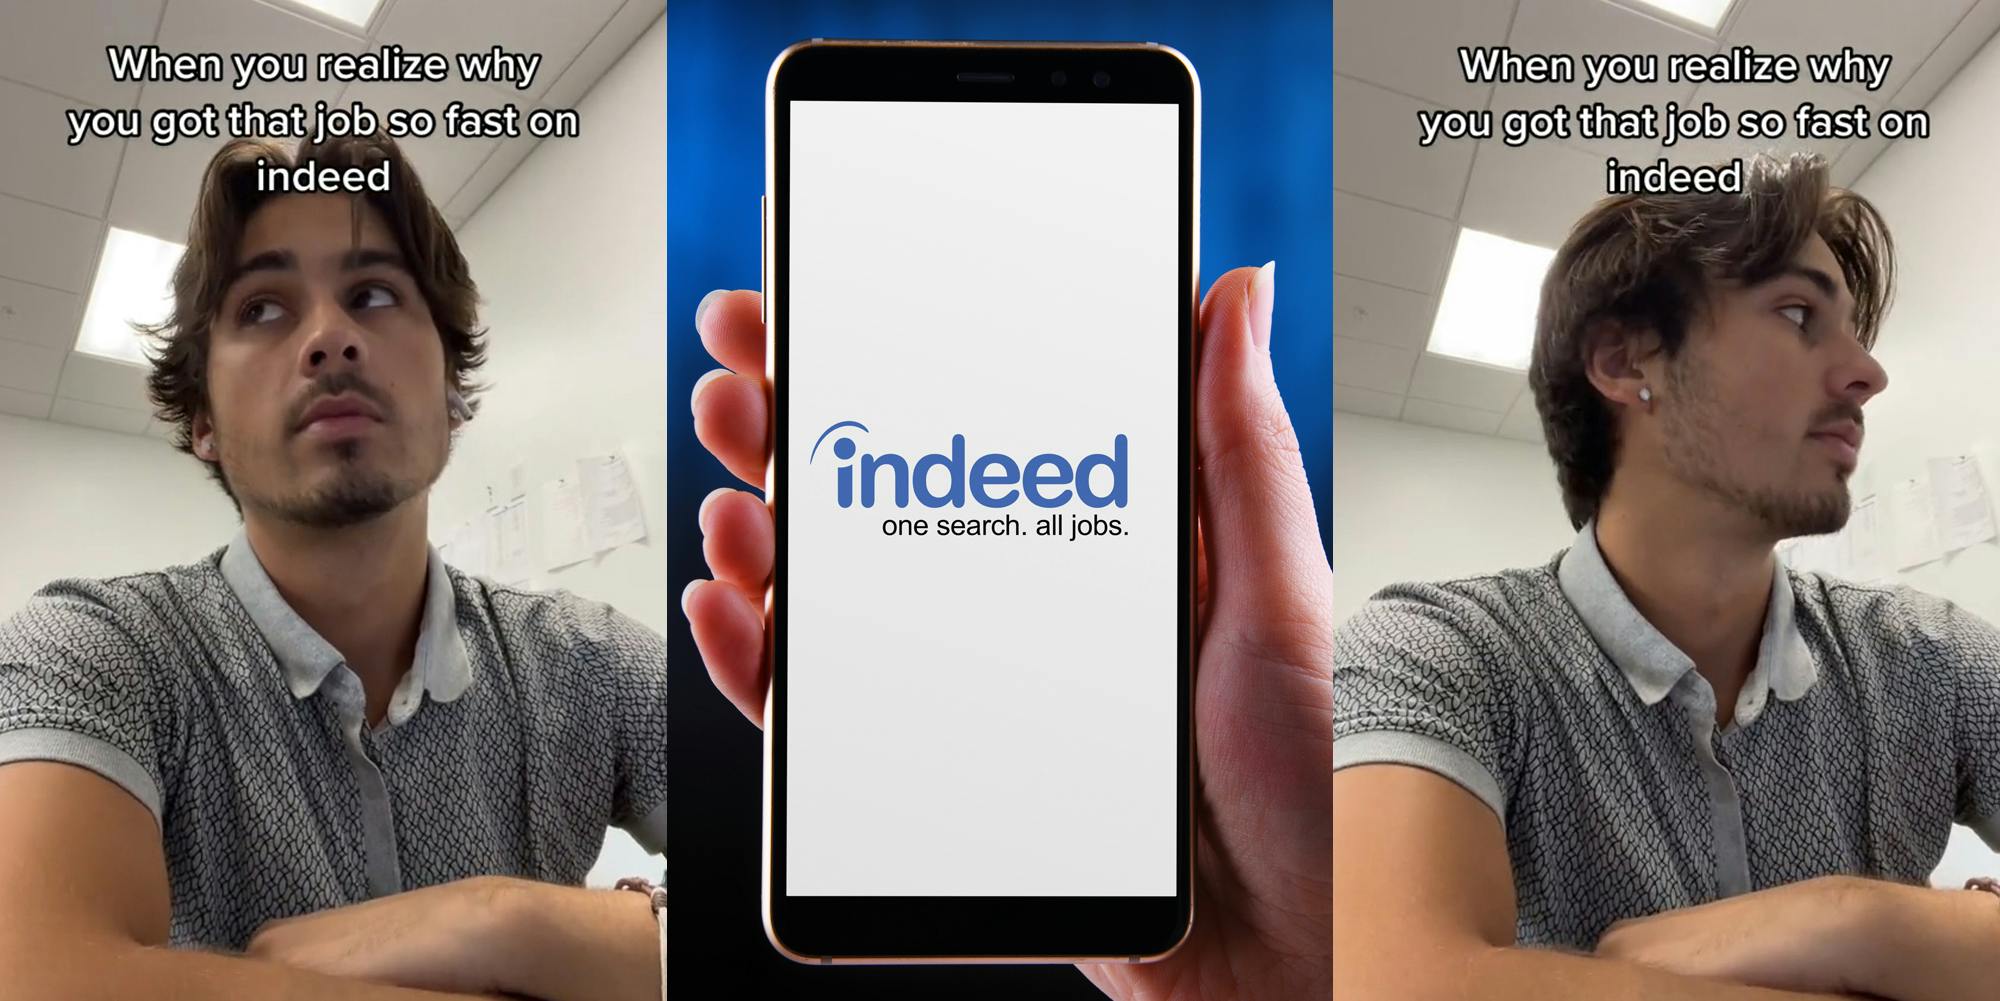 man sitting with arms crossed caption "When you realize why you got that job so fast on indeed" (l) hand holding phone in front of blue background with indeed on screen (c) man sitting with arms crossed caption "When you realize why you got that job so fast on indeed" (r)